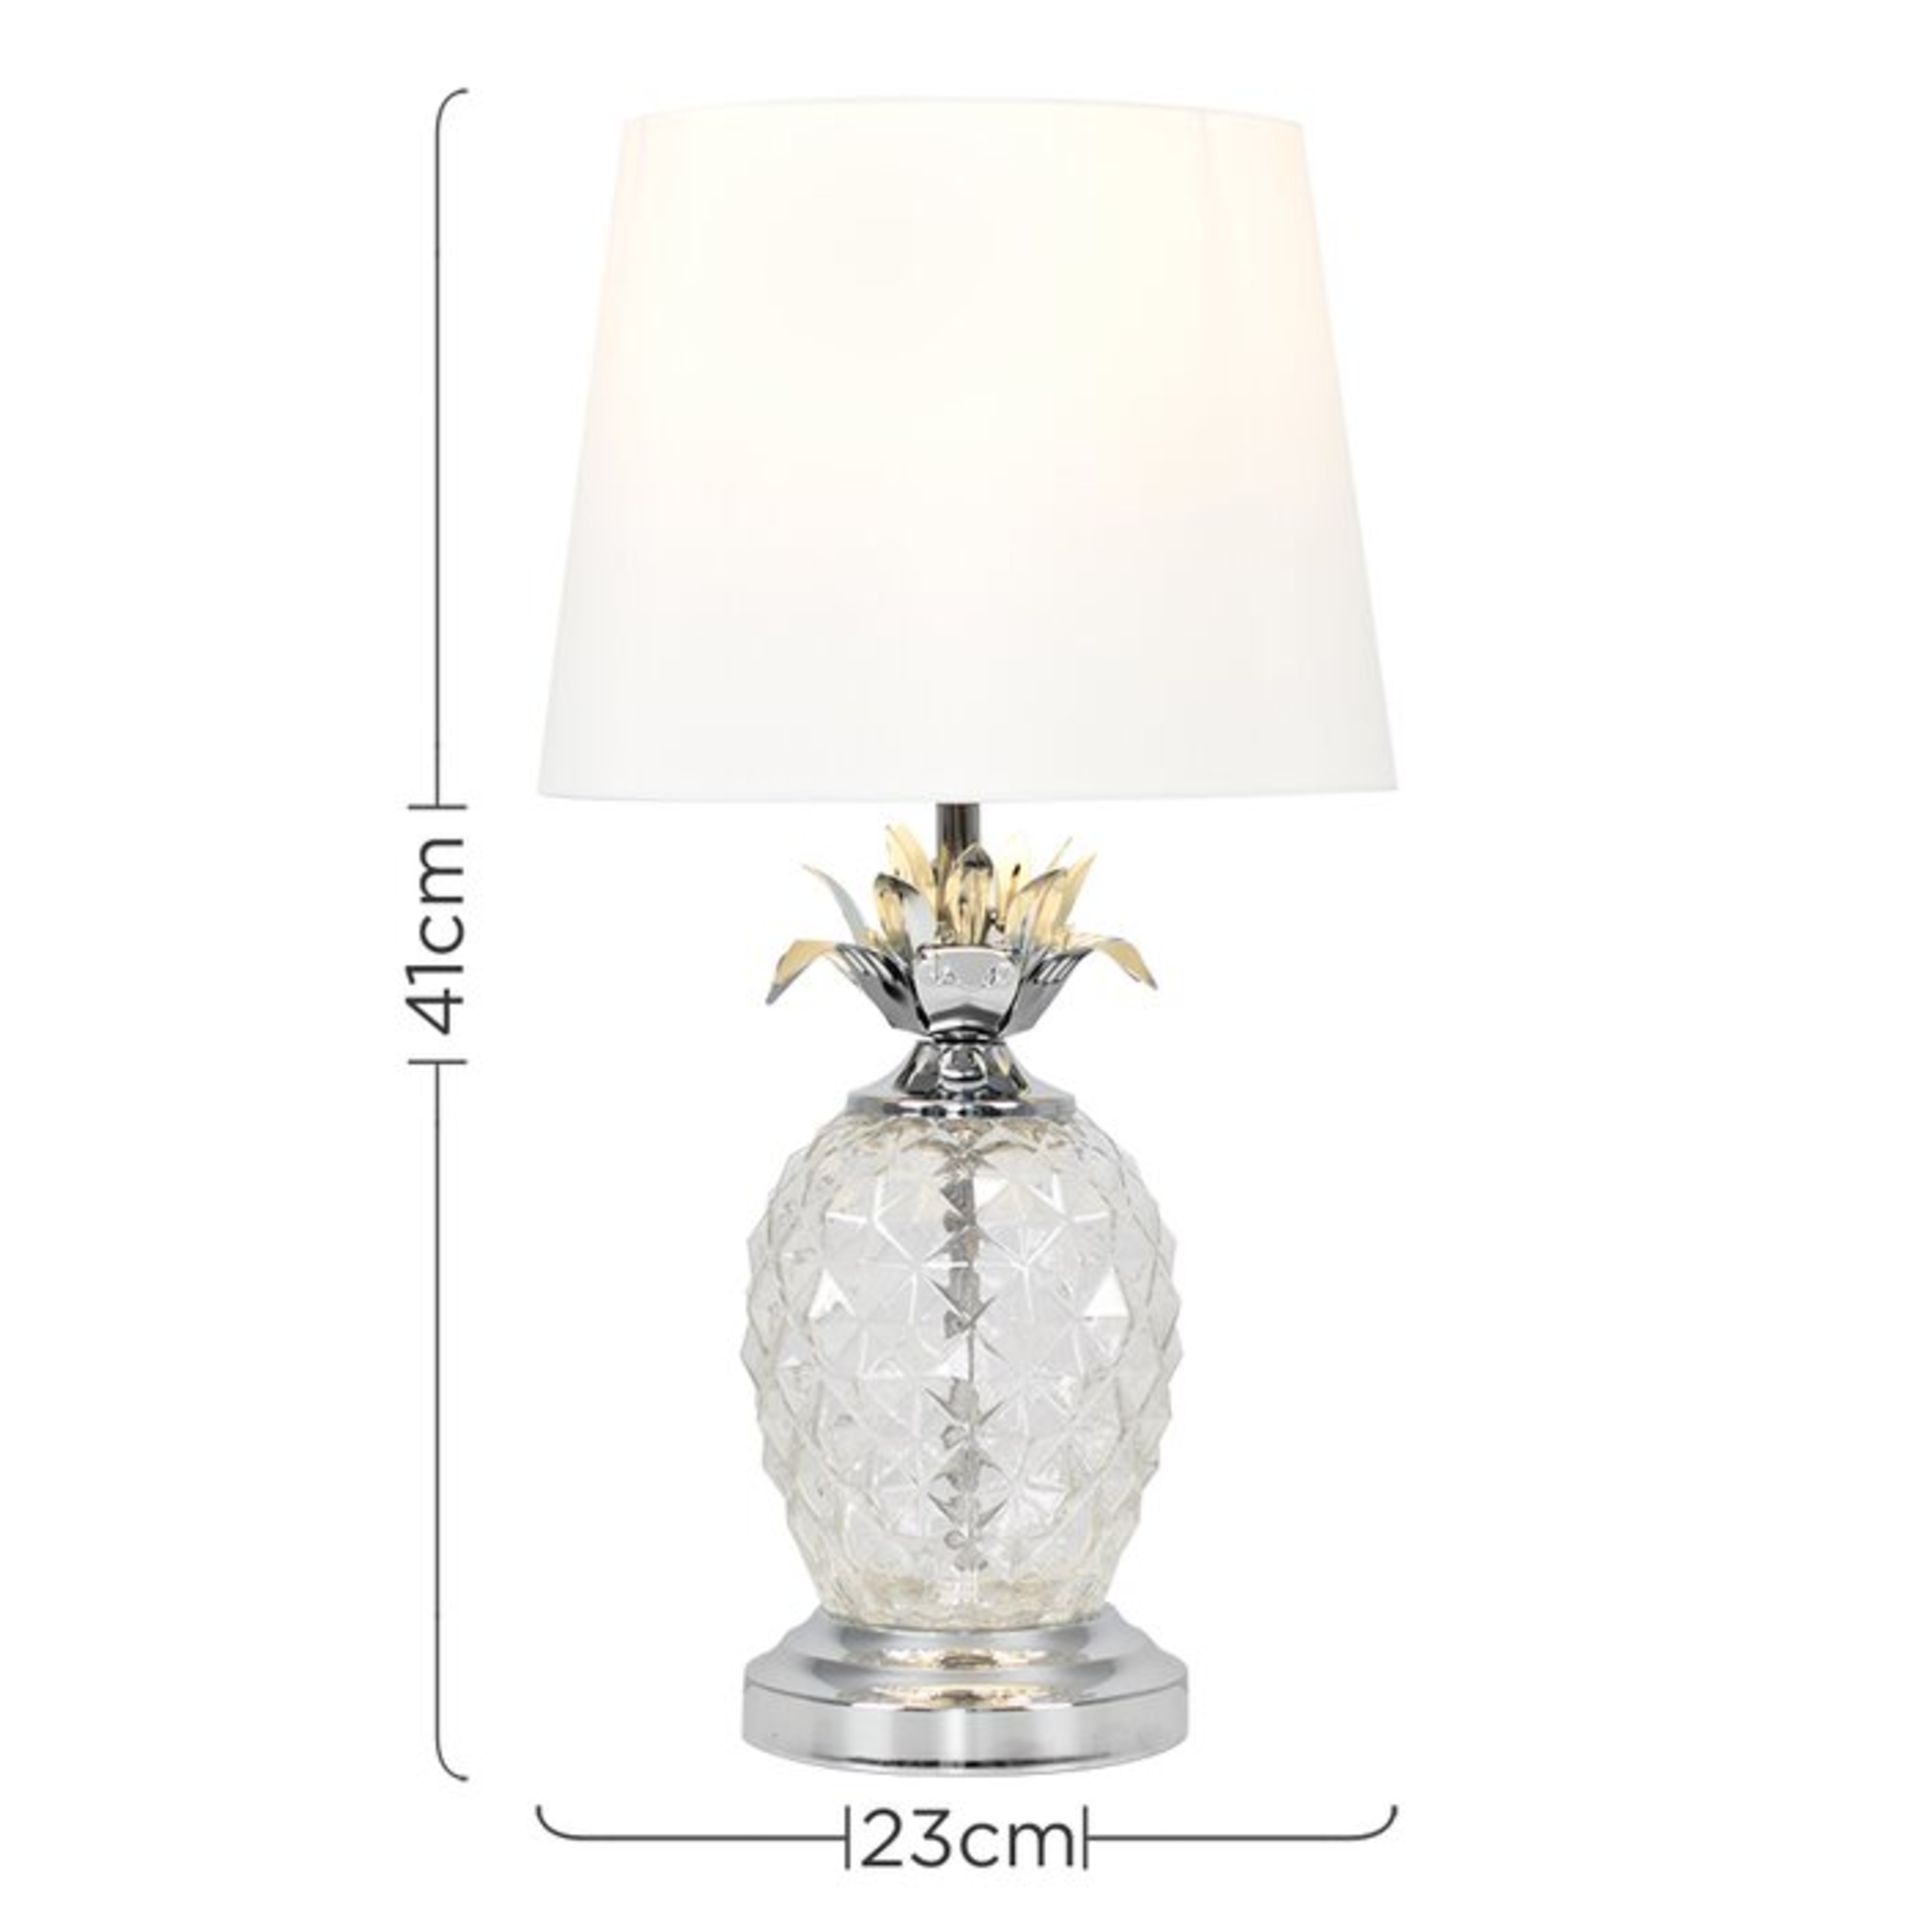 Dempster 41cm Table Lamp - RRP £49.99 - Image 3 of 3